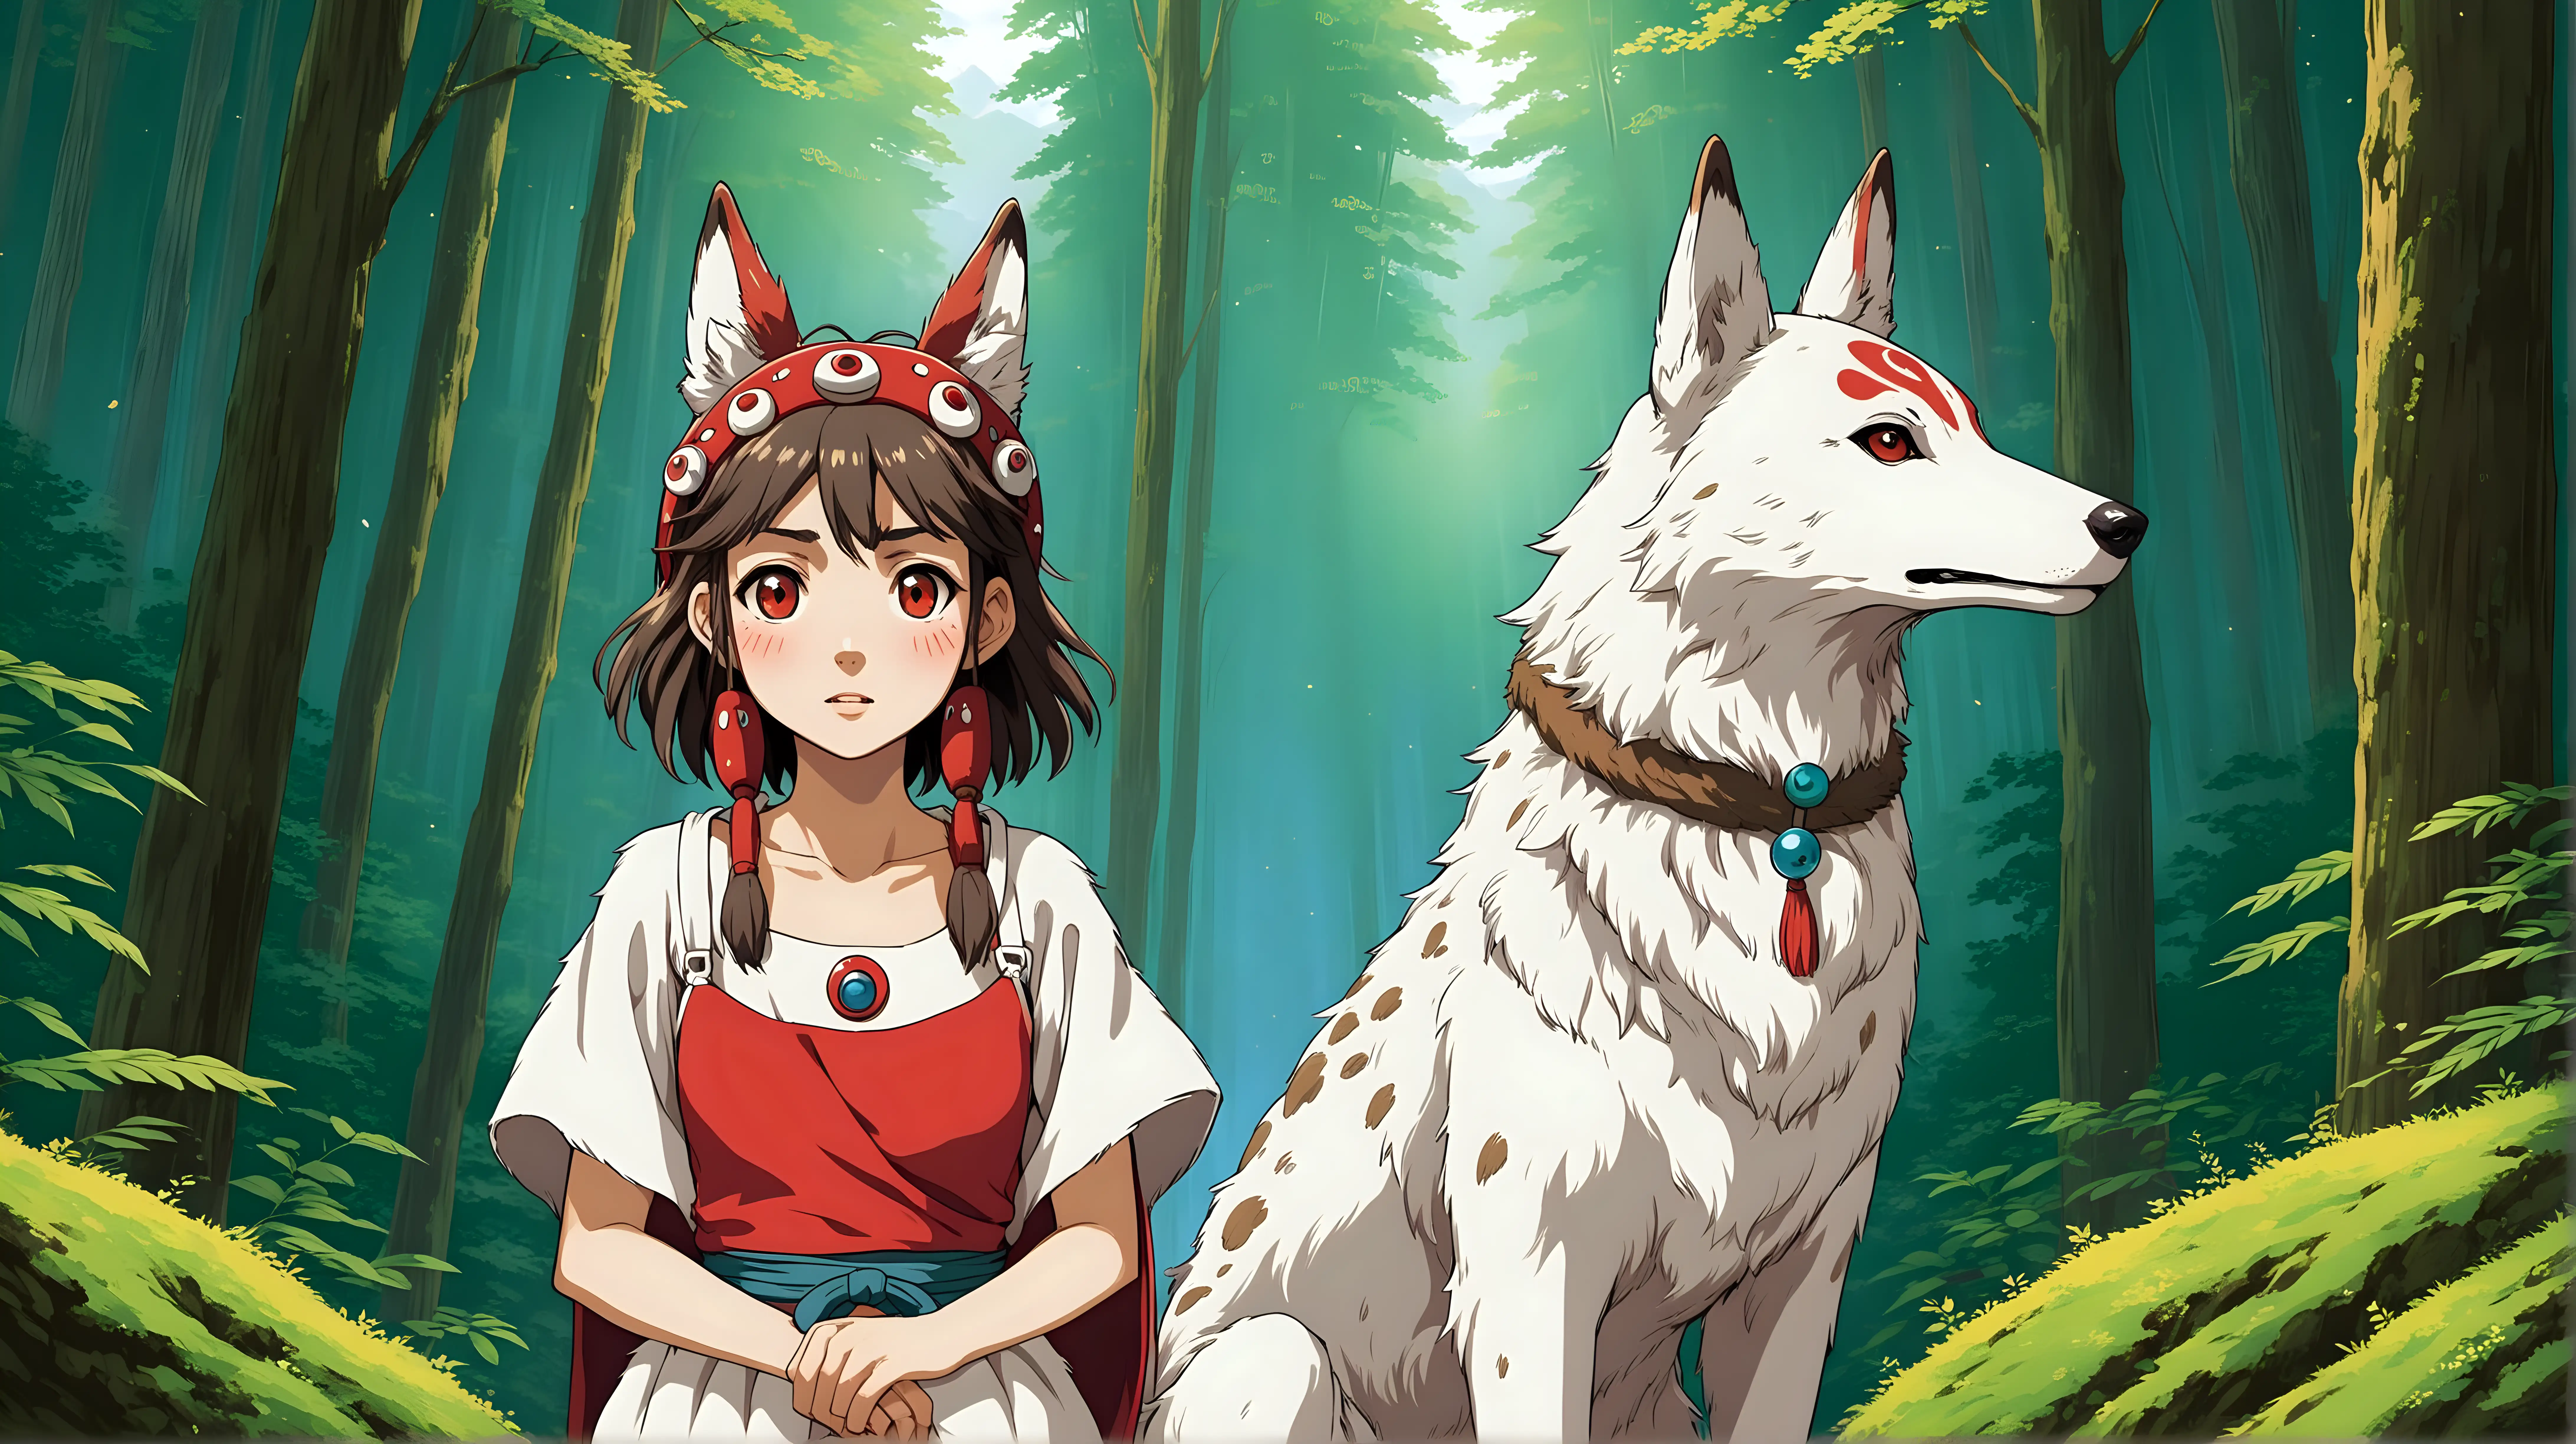 Princess Mononoke Character at 30 Mythical Warrior in Mature Form